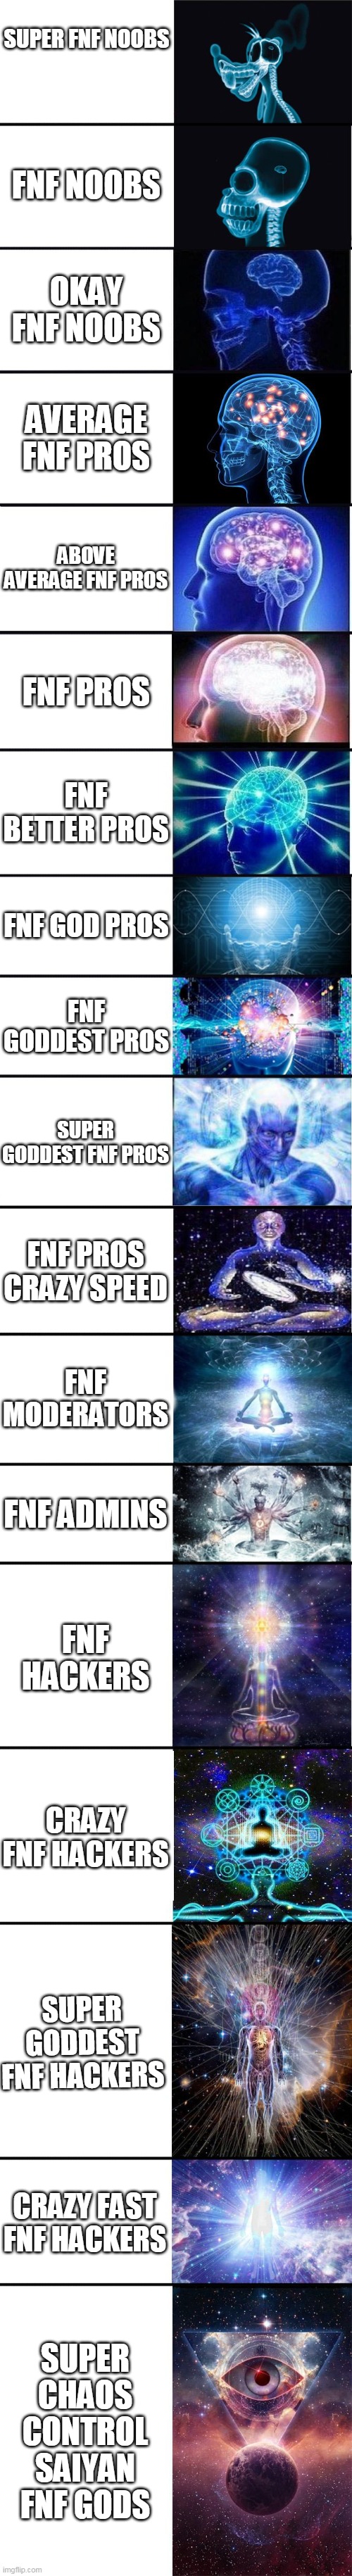 fnf noobs to gods | SUPER FNF NOOBS; FNF NOOBS; OKAY FNF NOOBS; AVERAGE FNF PROS; ABOVE AVERAGE FNF PROS; FNF PROS; FNF BETTER PROS; FNF GOD PROS; FNF GODDEST PROS; SUPER GODDEST FNF PROS; FNF PROS CRAZY SPEED; FNF MODERATORS; FNF ADMINS; FNF HACKERS; CRAZY FNF HACKERS; SUPER GODDEST FNF HACKERS; CRAZY FAST FNF HACKERS; SUPER CHAOS CONTROL SAIYAN FNF GODS | image tagged in expanding brain 9001 | made w/ Imgflip meme maker